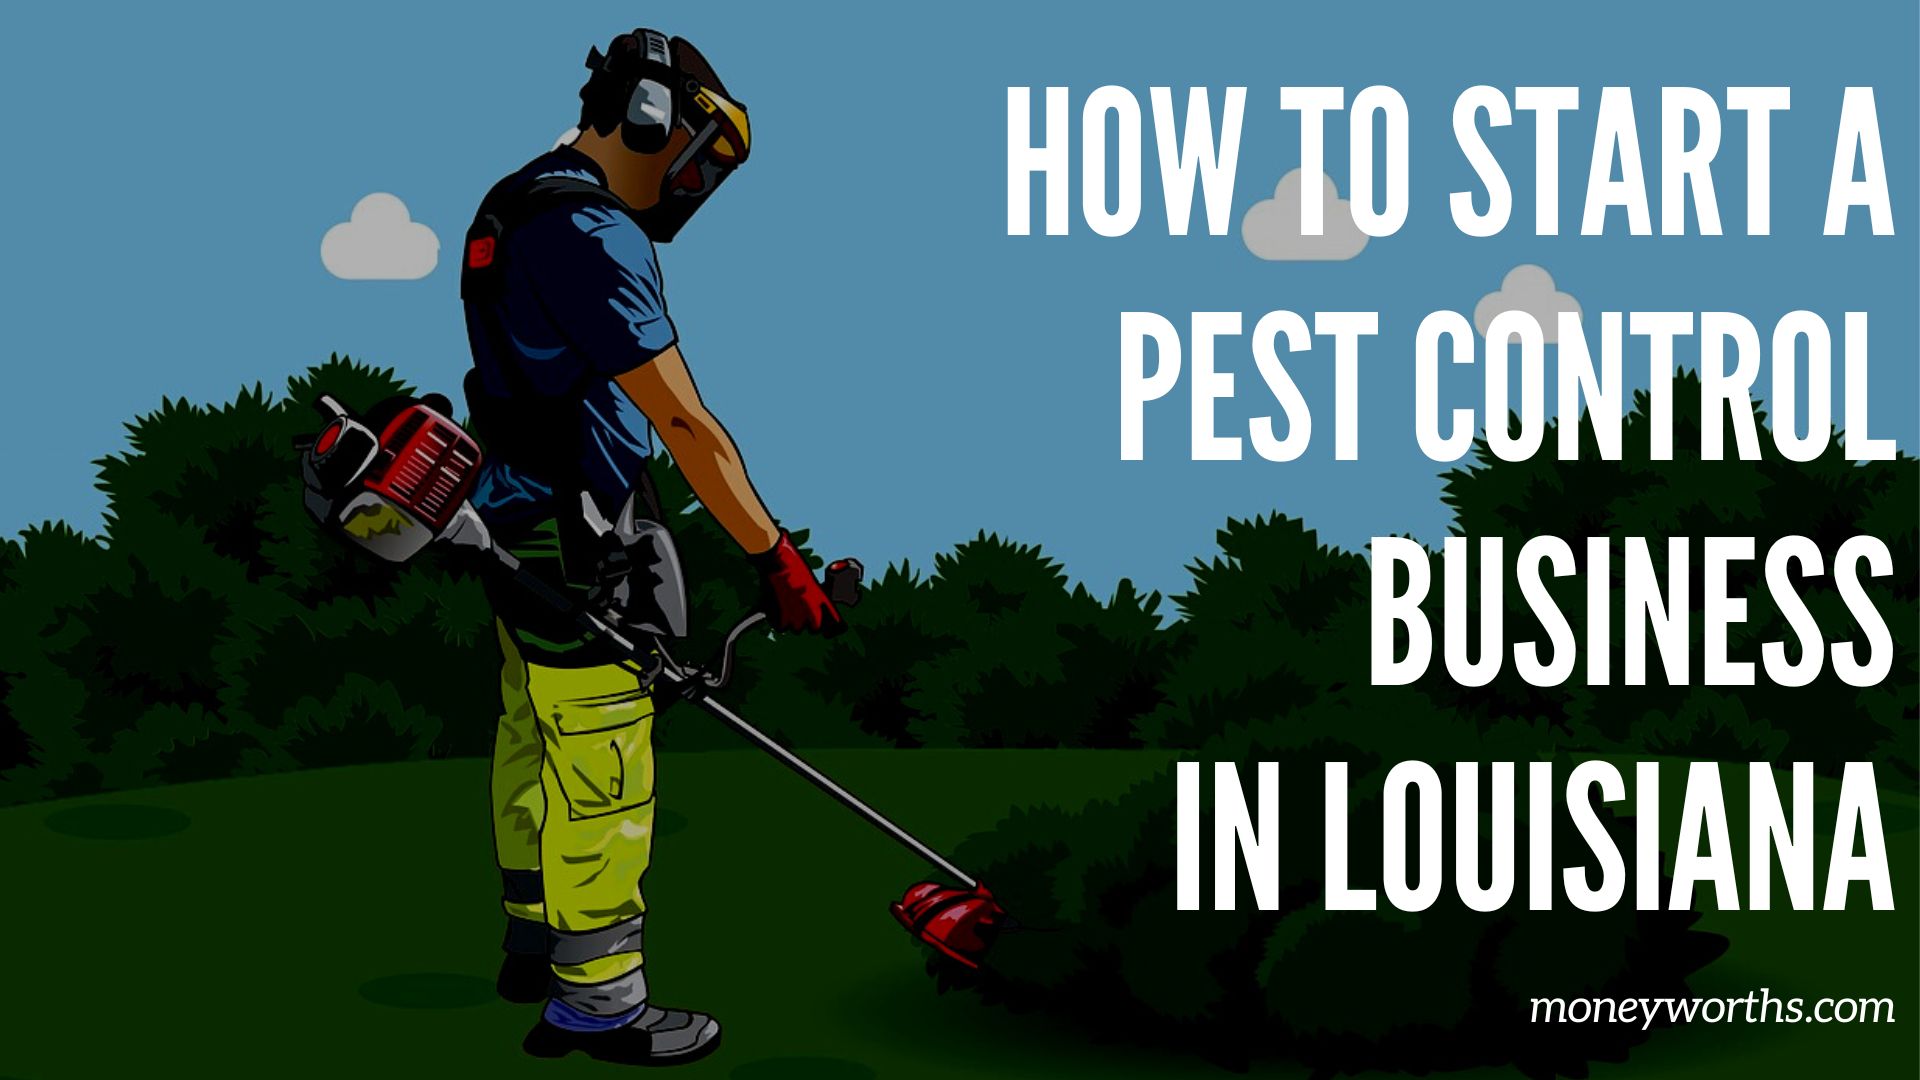 How to start a pest control business in Louisiana?